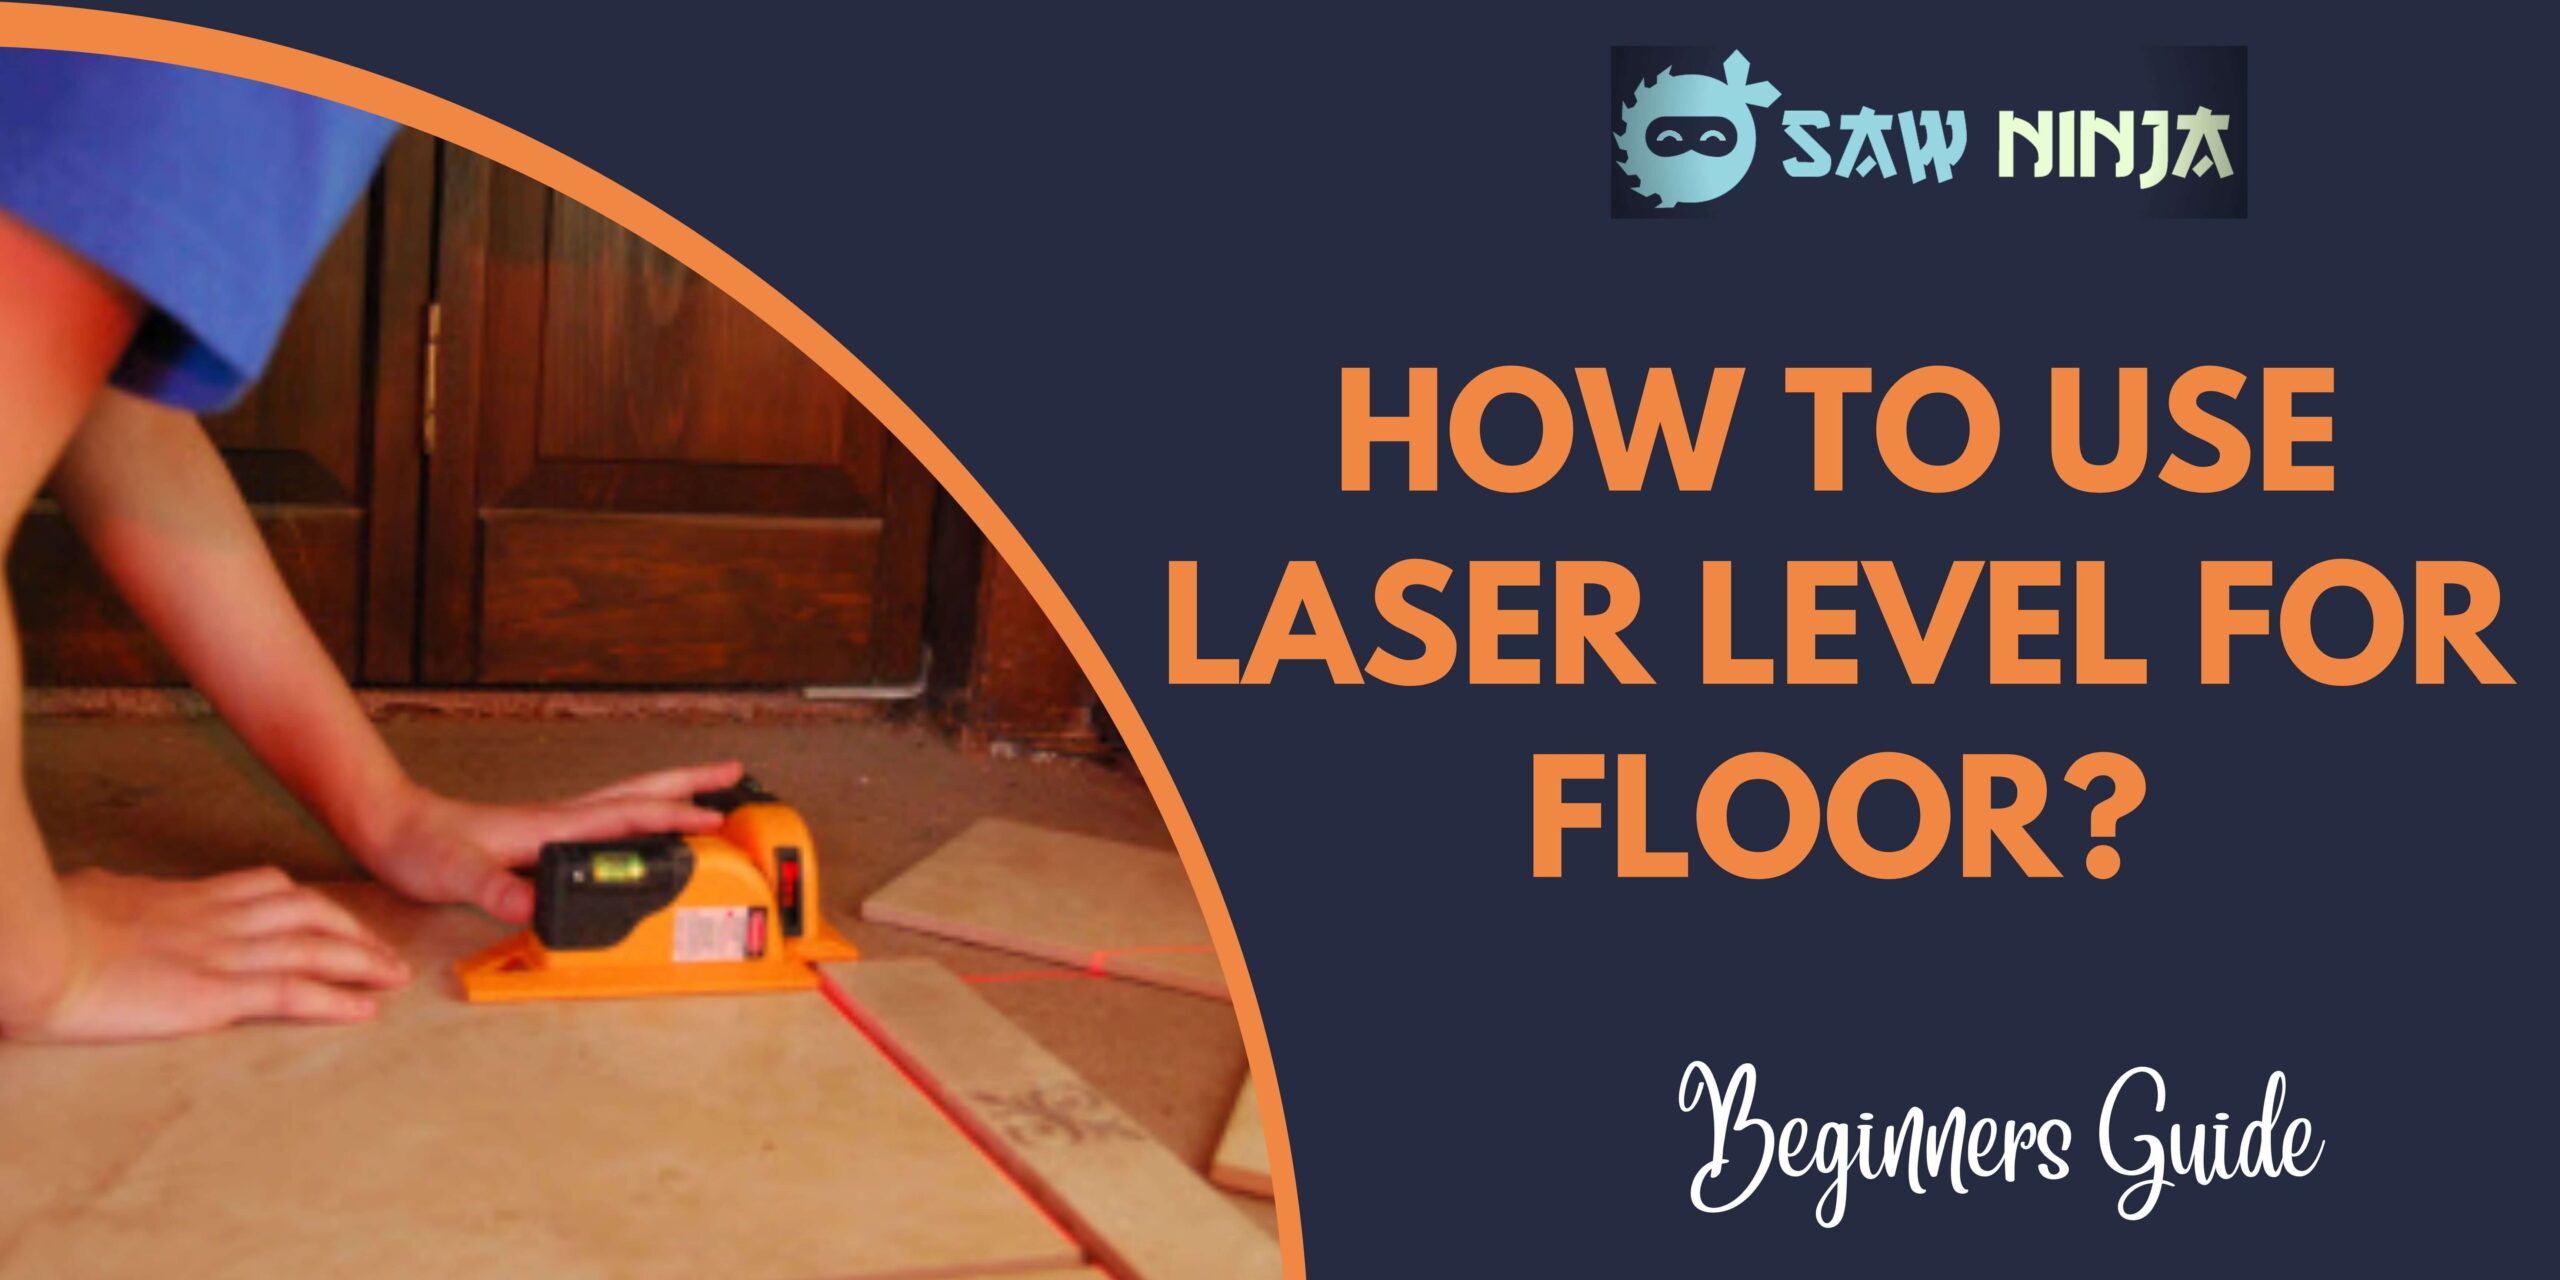 How to Use Laser Level for Floor?